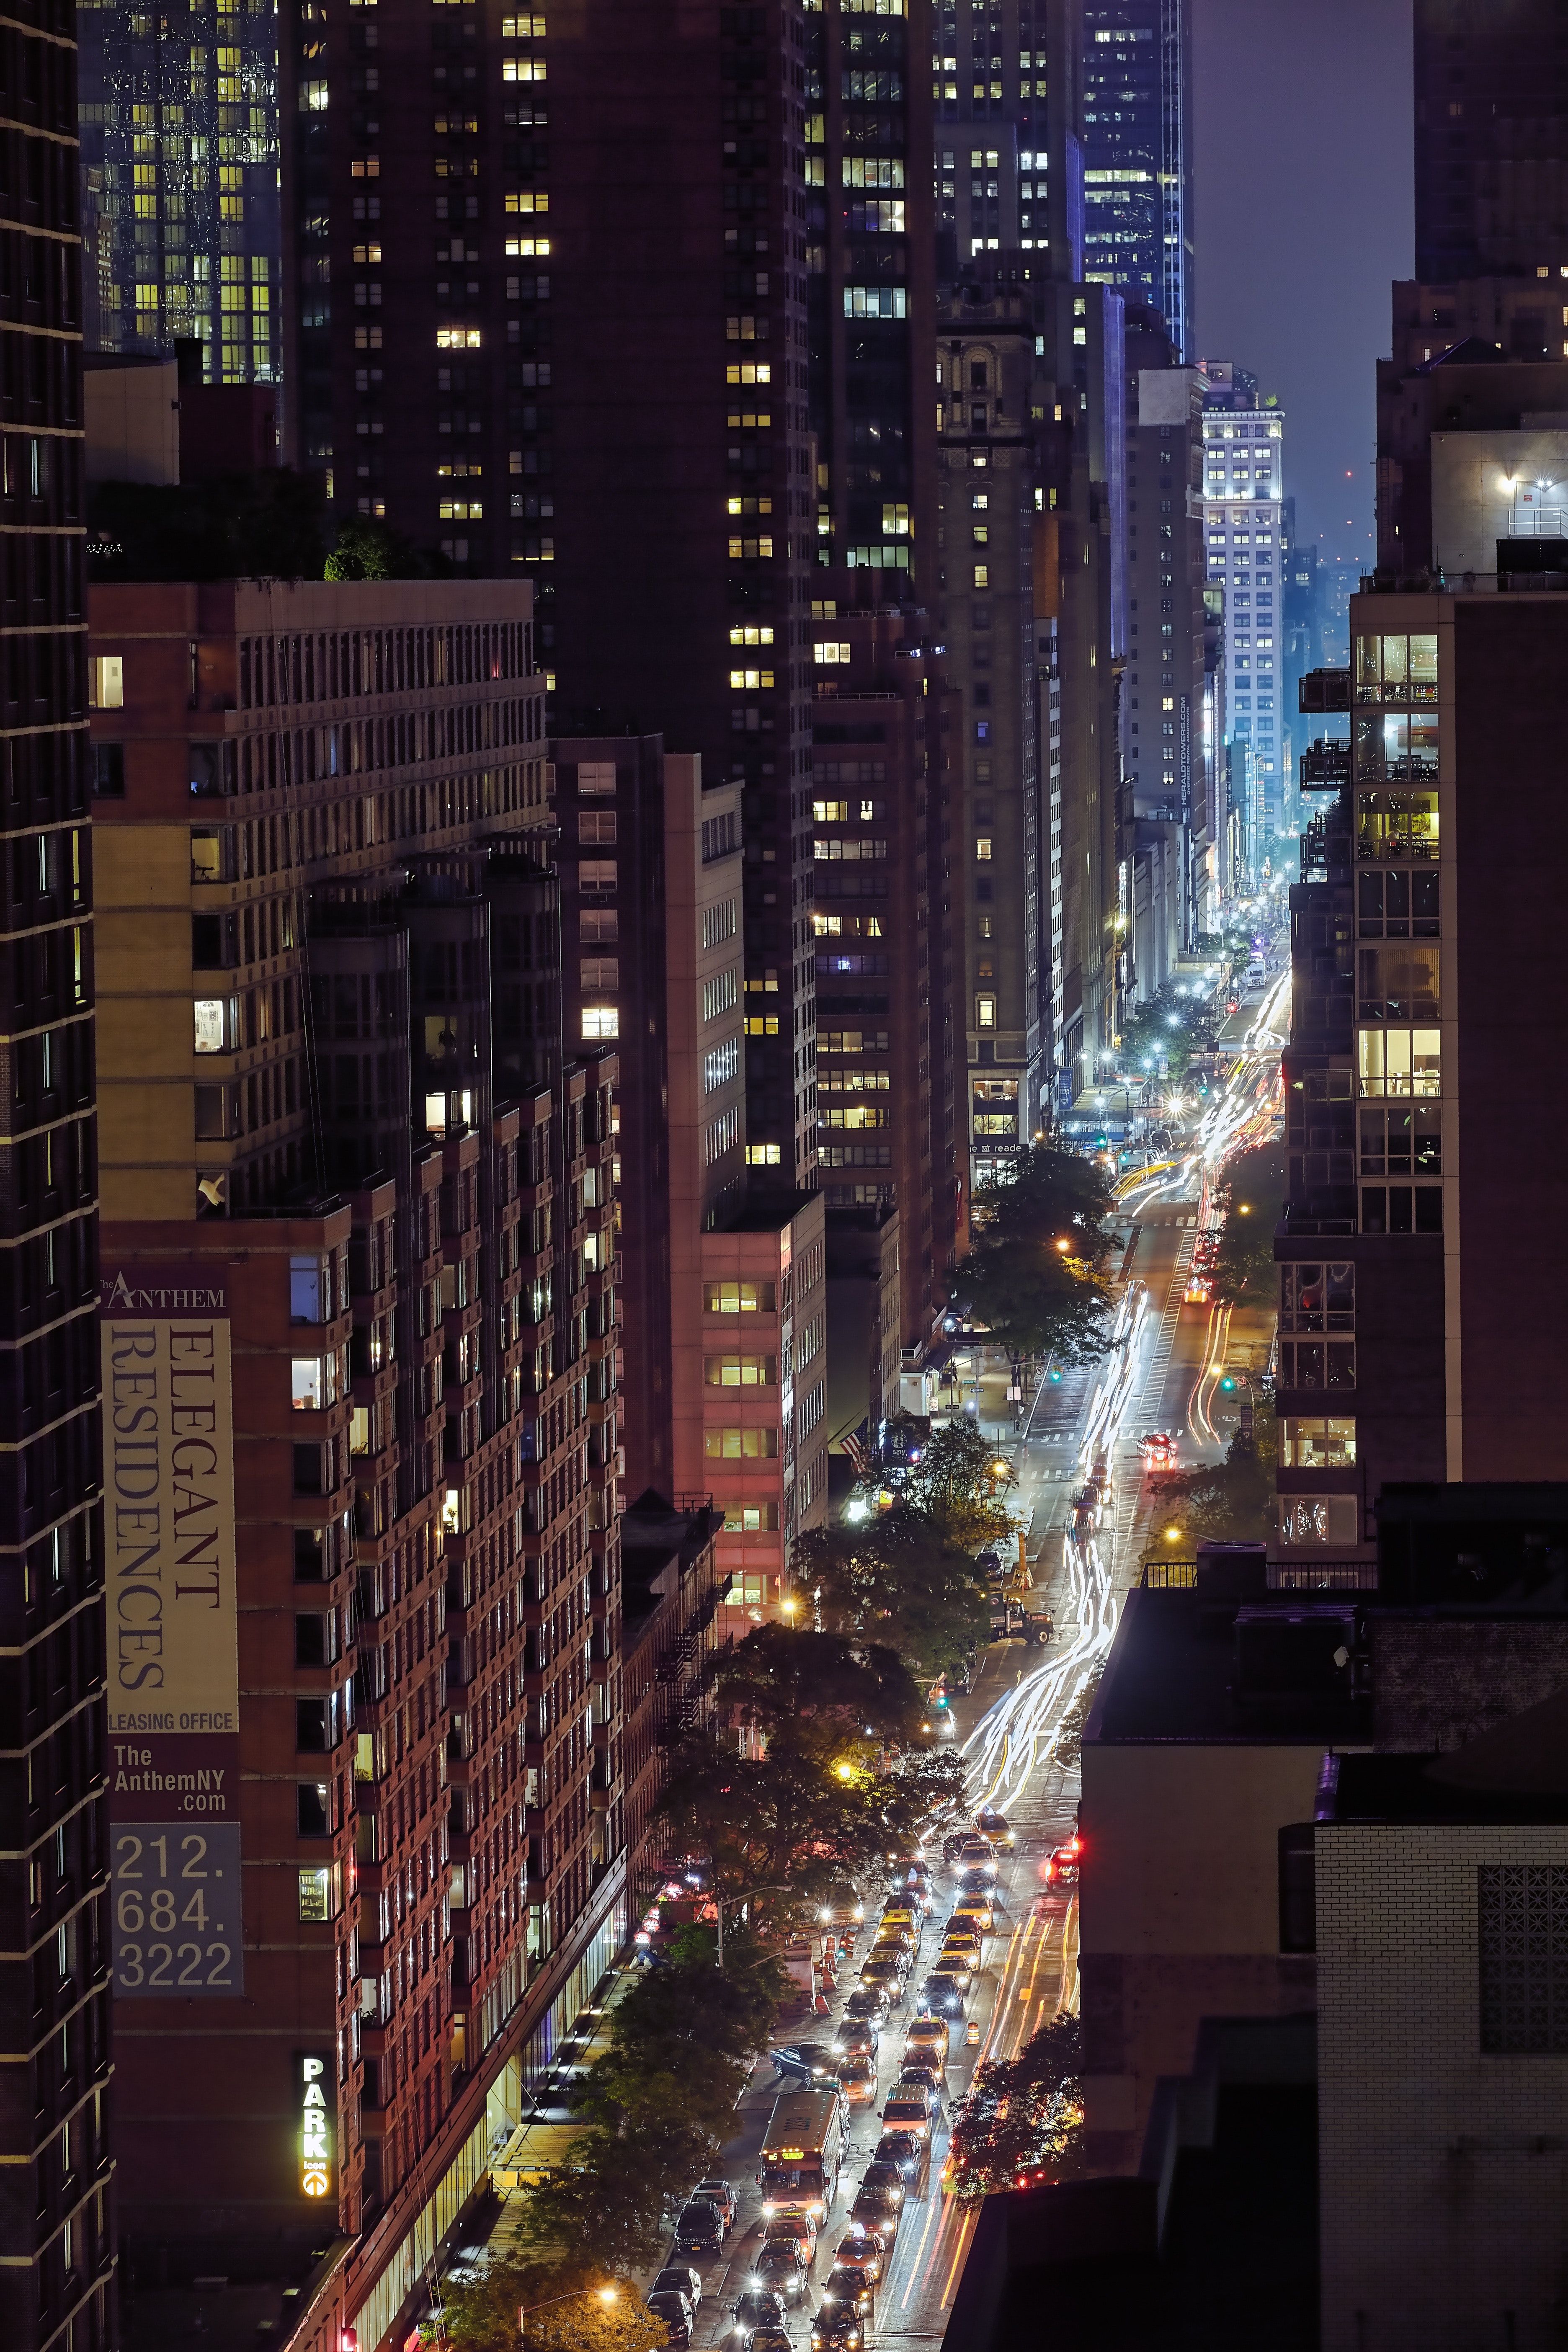 A city street at night with traffic and tall buildings. - New York, skyline